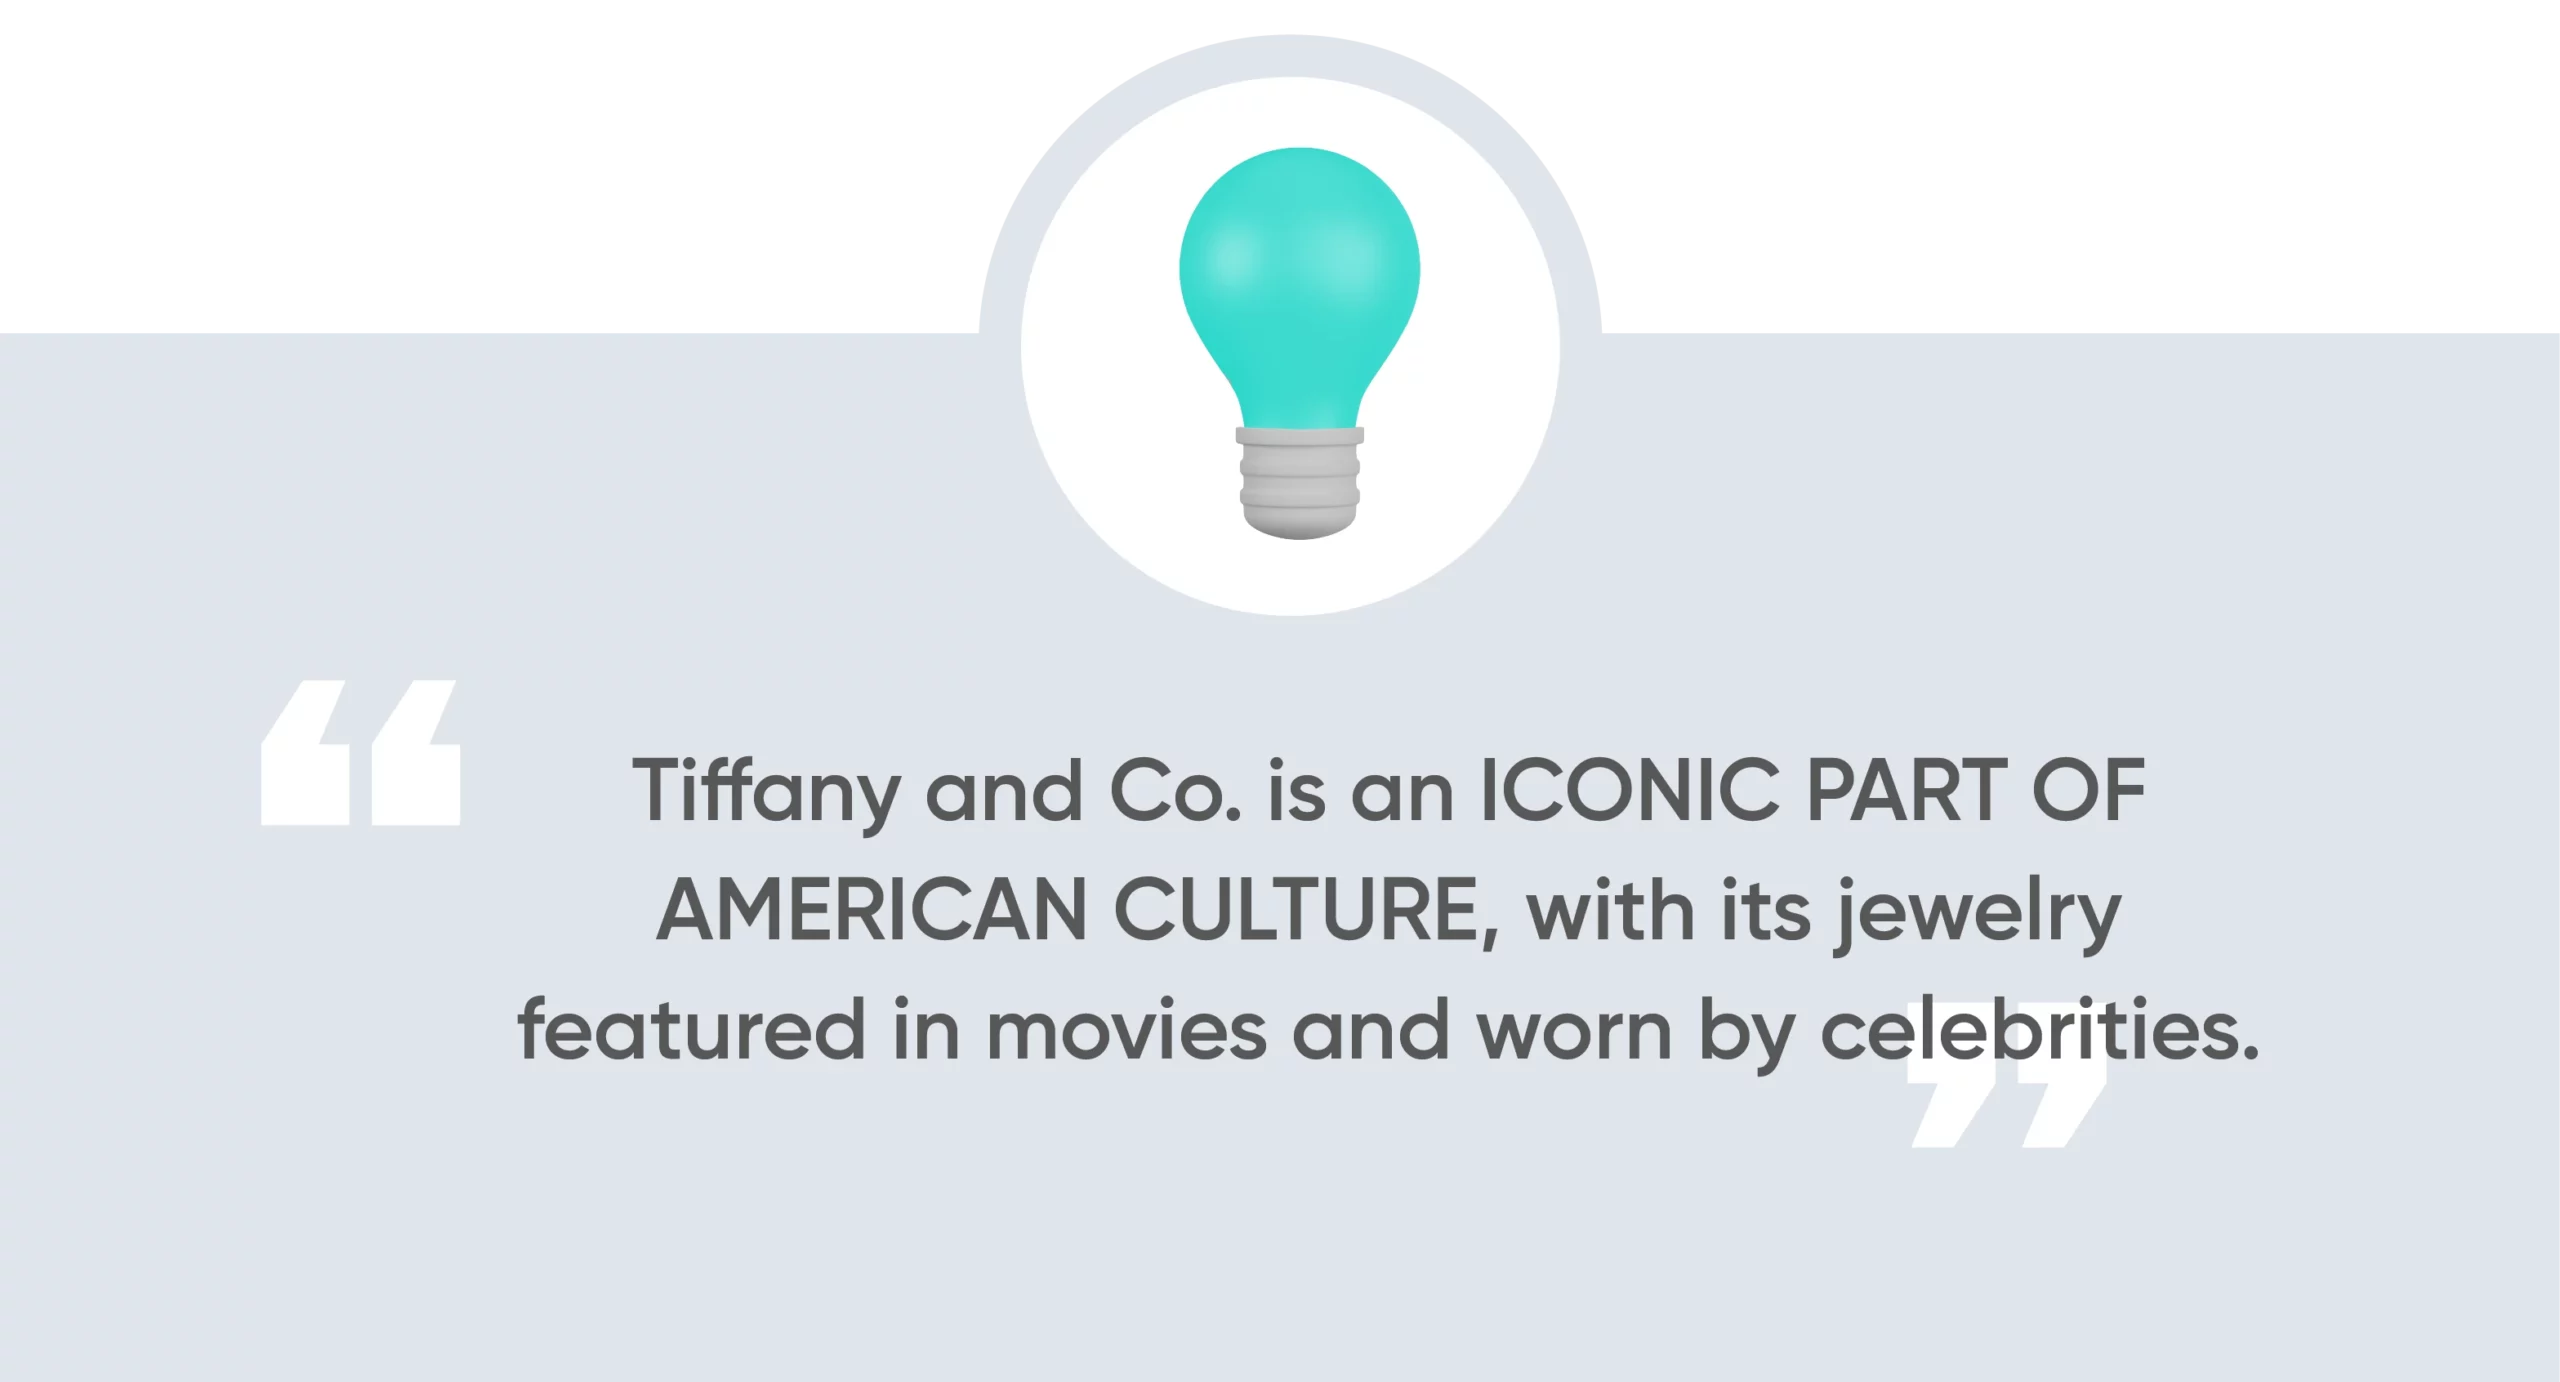 Tiffany and Co. is an iconic part of American culture, with its jewelry featured in movies and worn by celebrities.